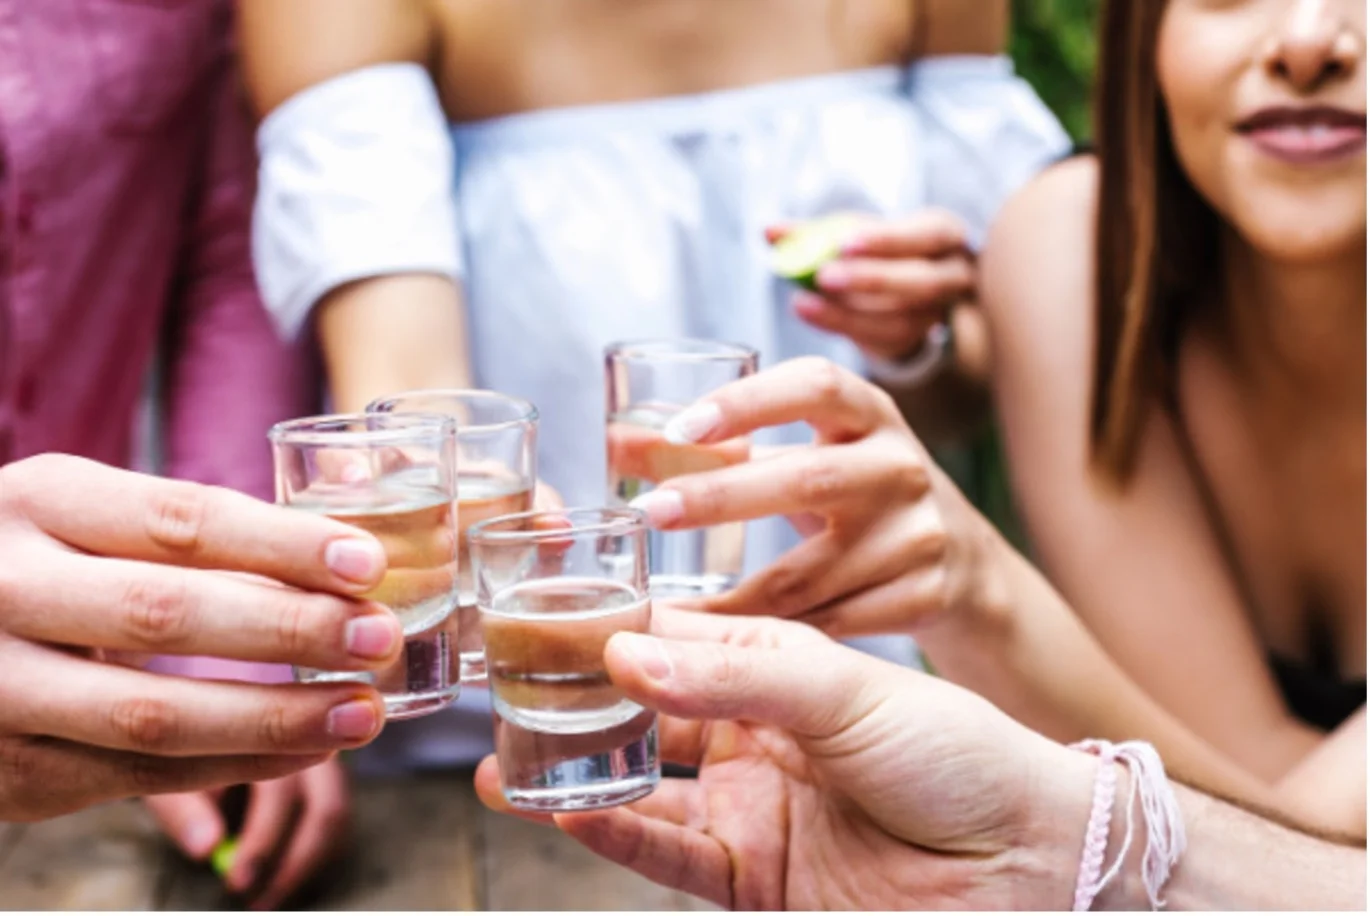 Group of young women clink shot glasses together